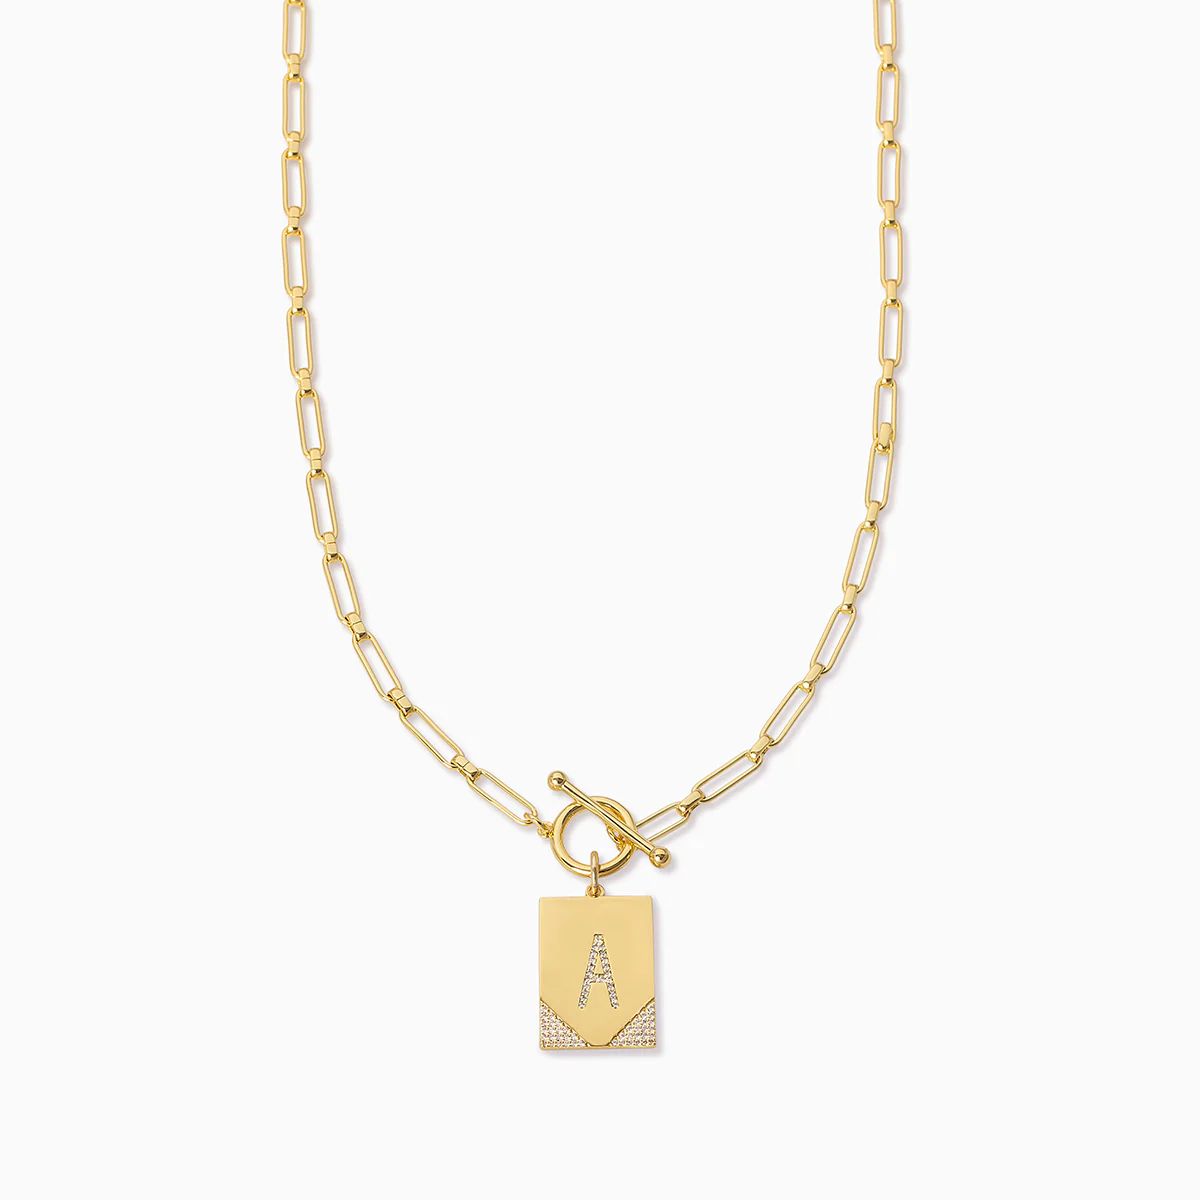 Leave Your Mark Chain Necklace | Uncommon James